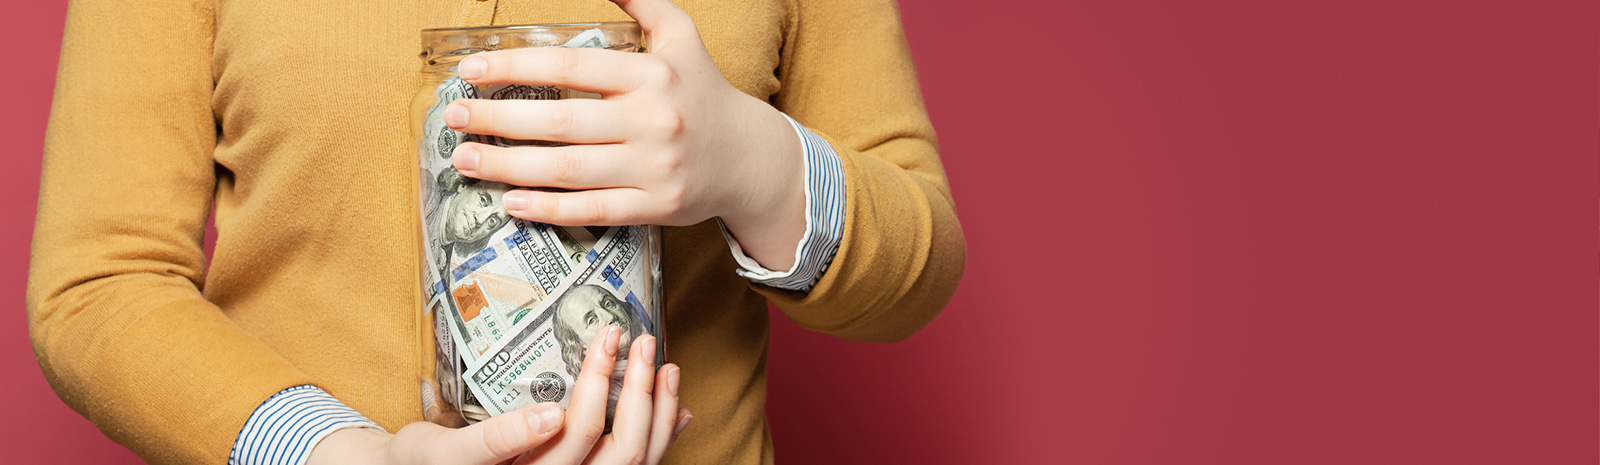 Person holding jar of money